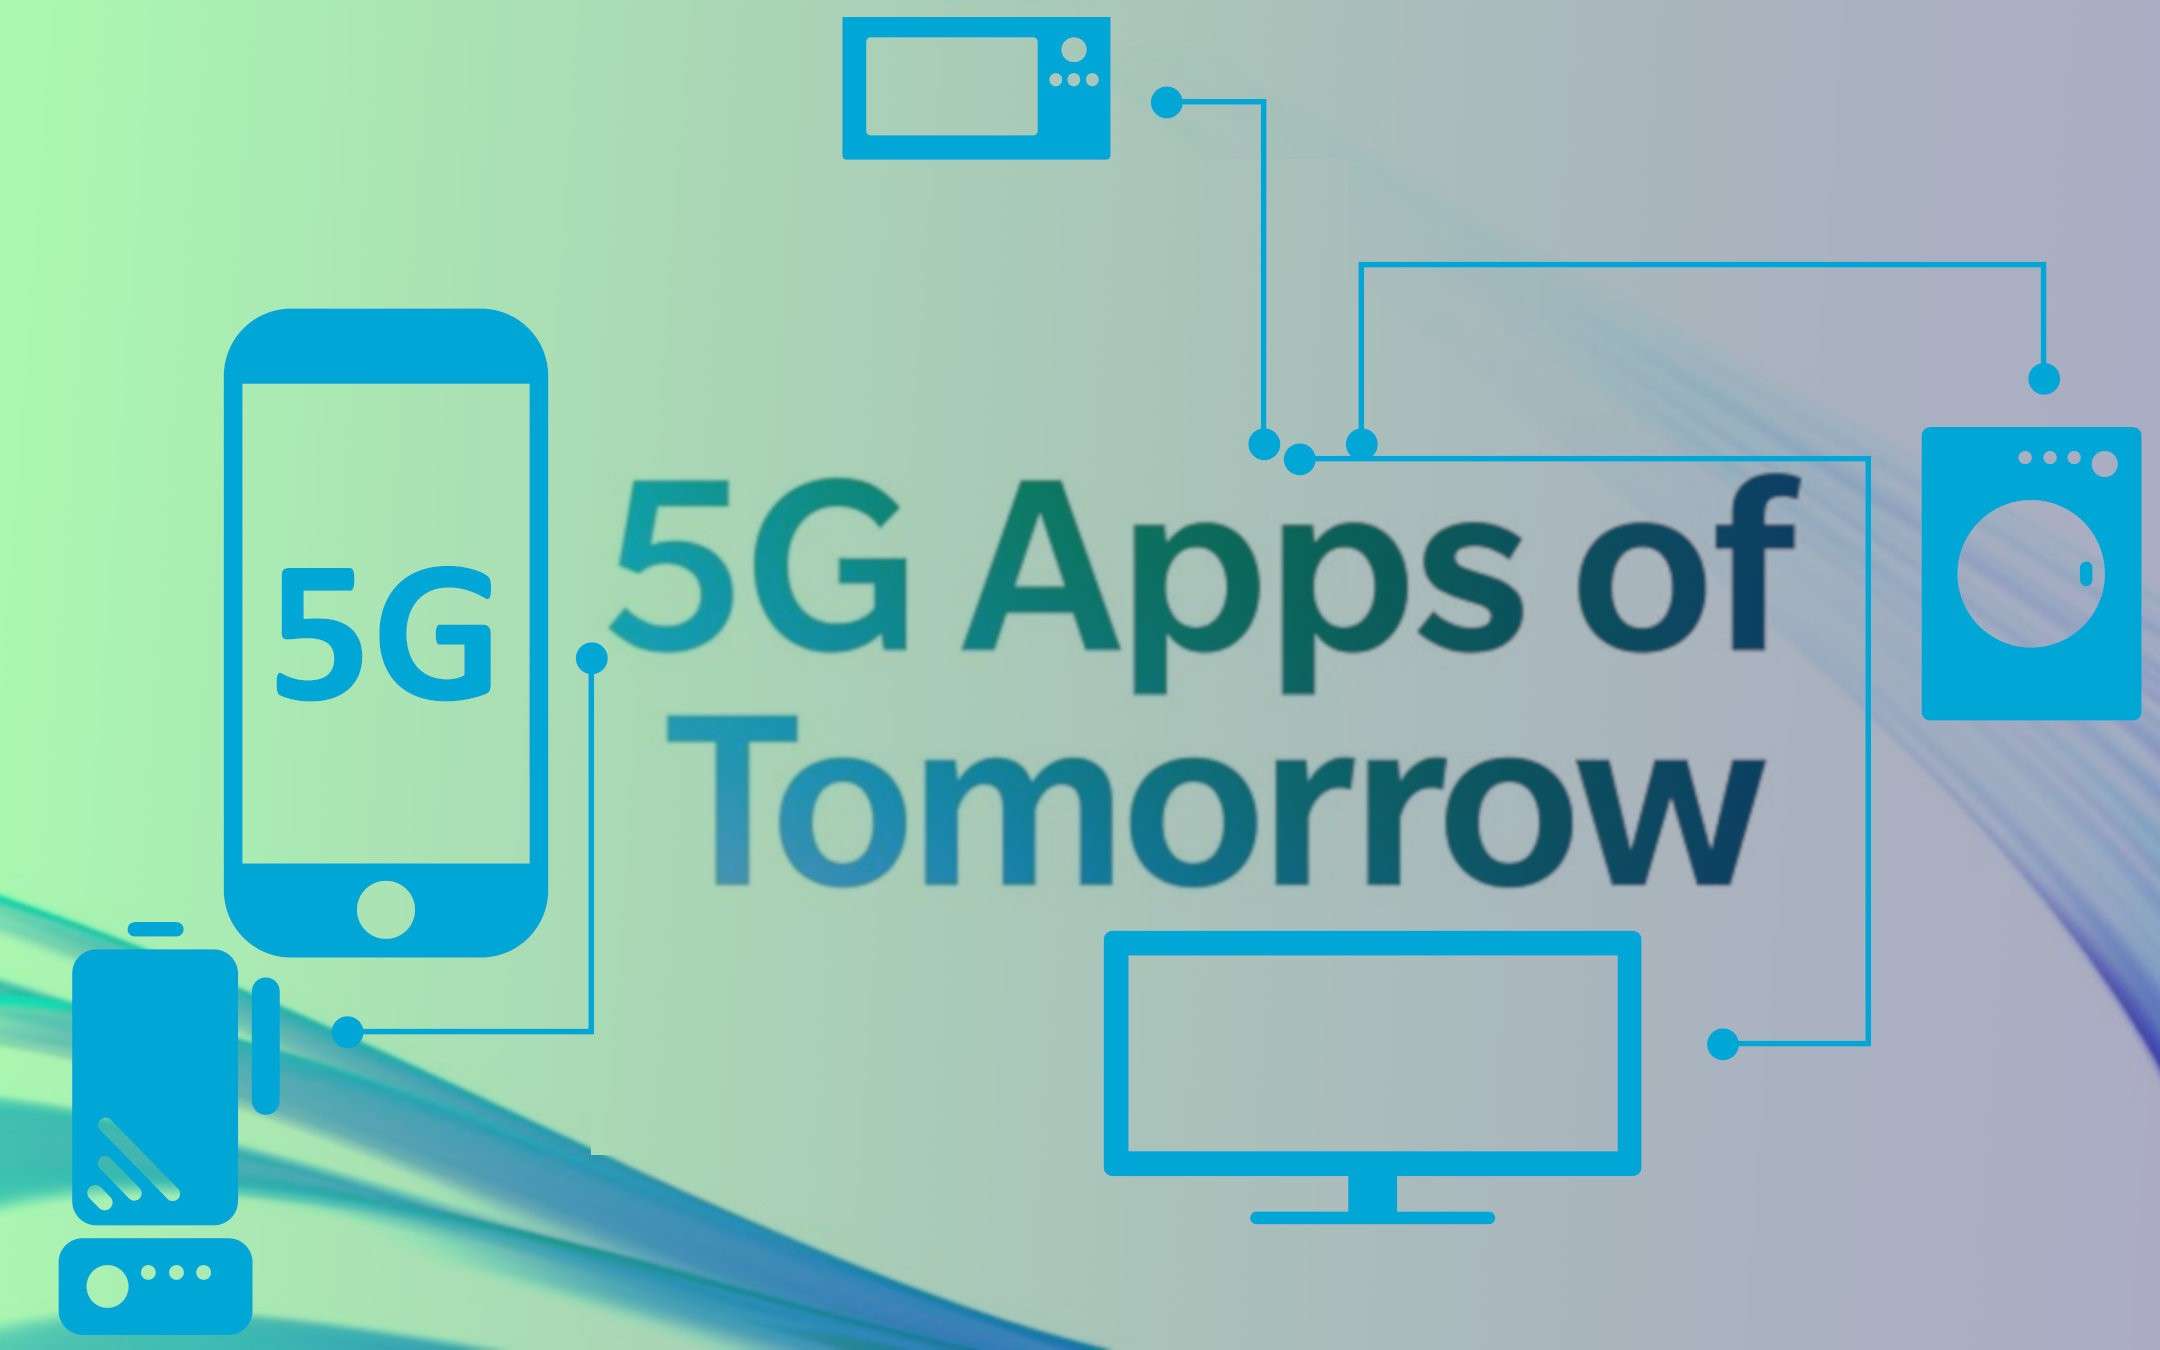 OnePlus 5G Apps of Tomorrow: candidature al via